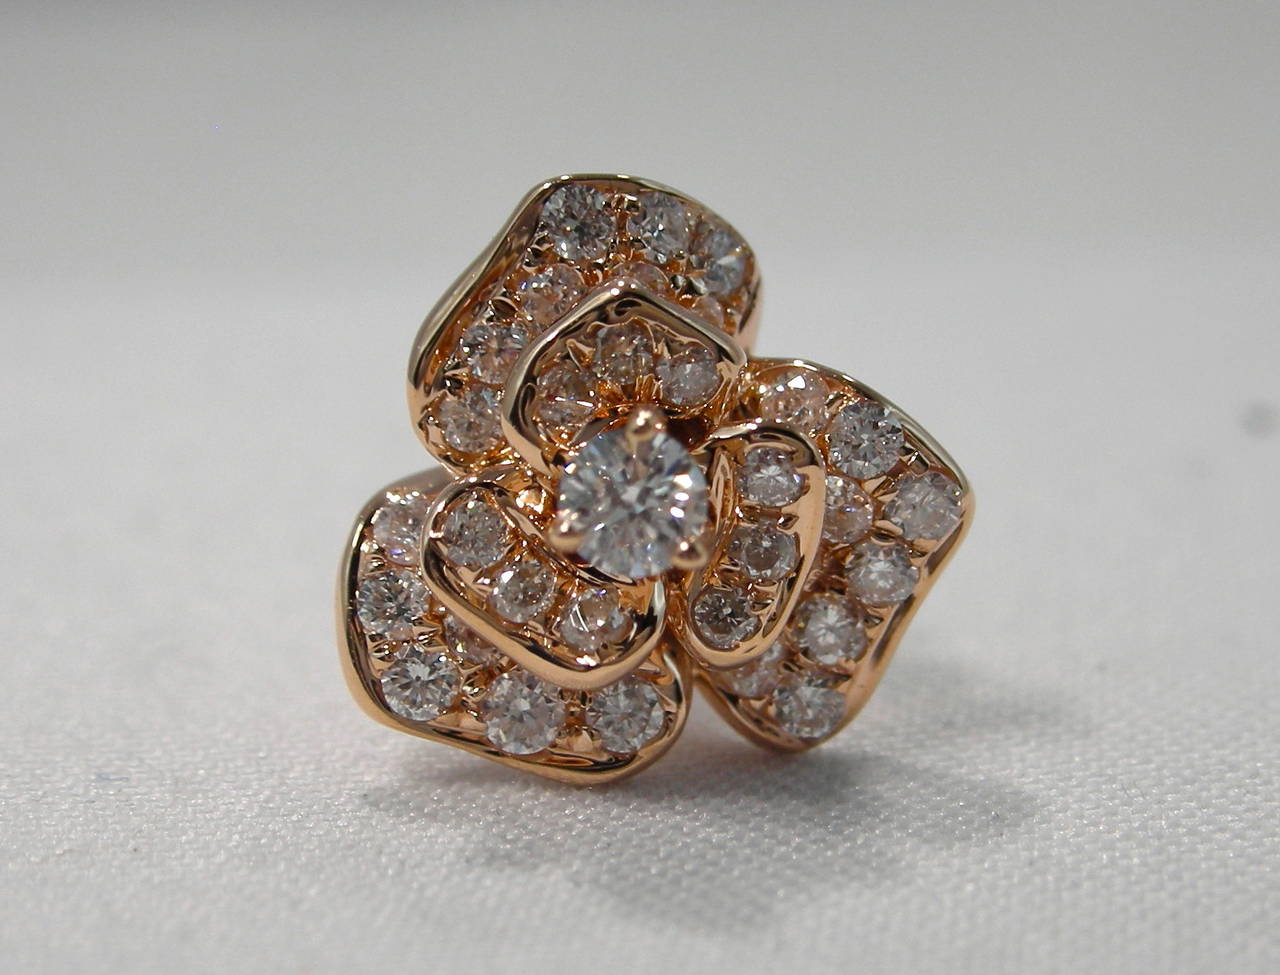 Jona design collection, 18 Karat rose gold, pair of roses stud earrings, set with 0.51 carats of G color, VVS1 clarity white diamonds. Crafted in Italy, signed Jona.

All of our jewelry is new and has never been previously owned or worn.